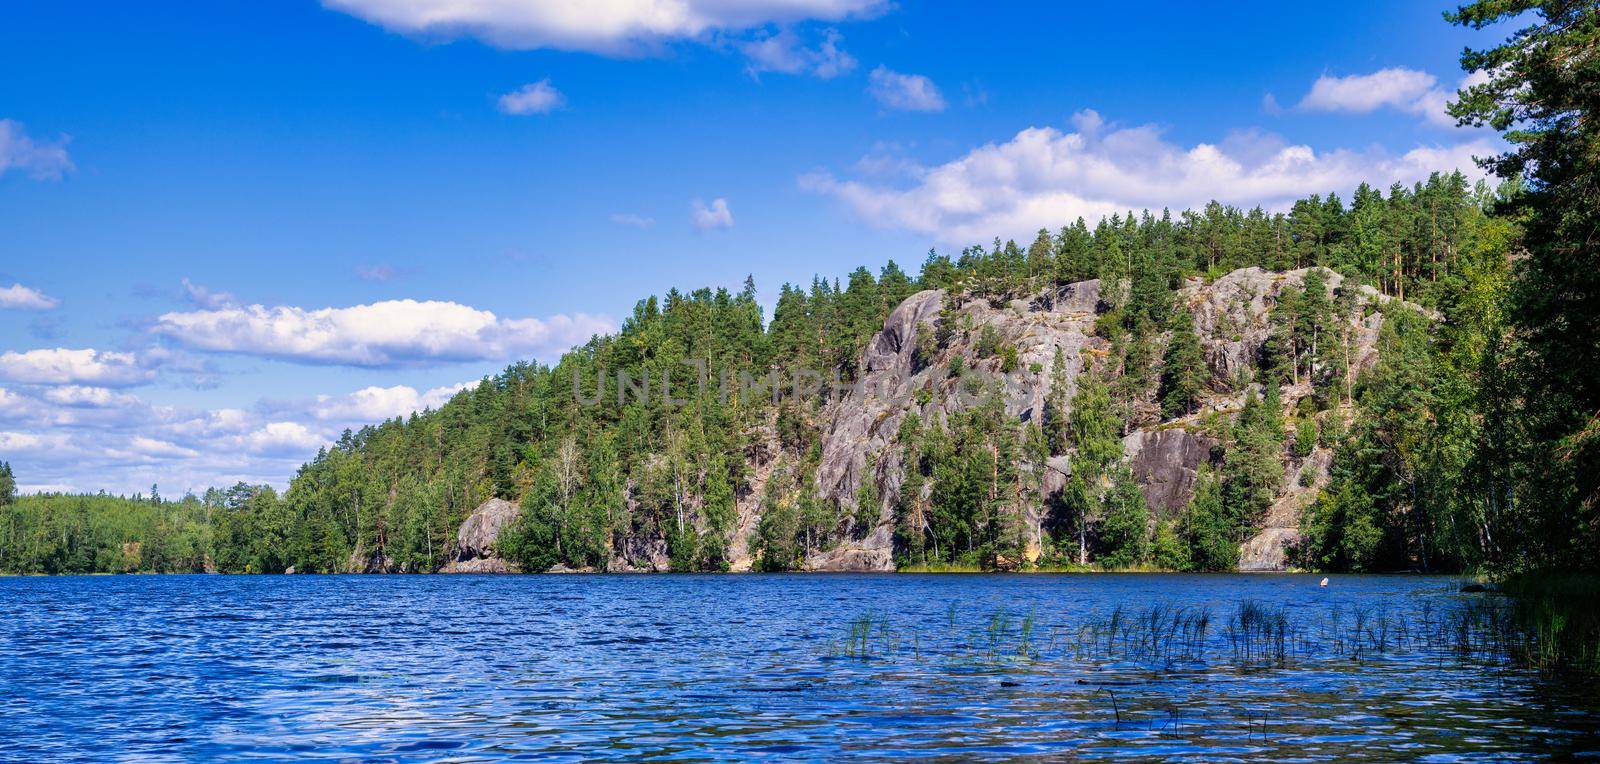 Landscape of the forest lake Yastrebinoye with ice age rocks in the background. Russia